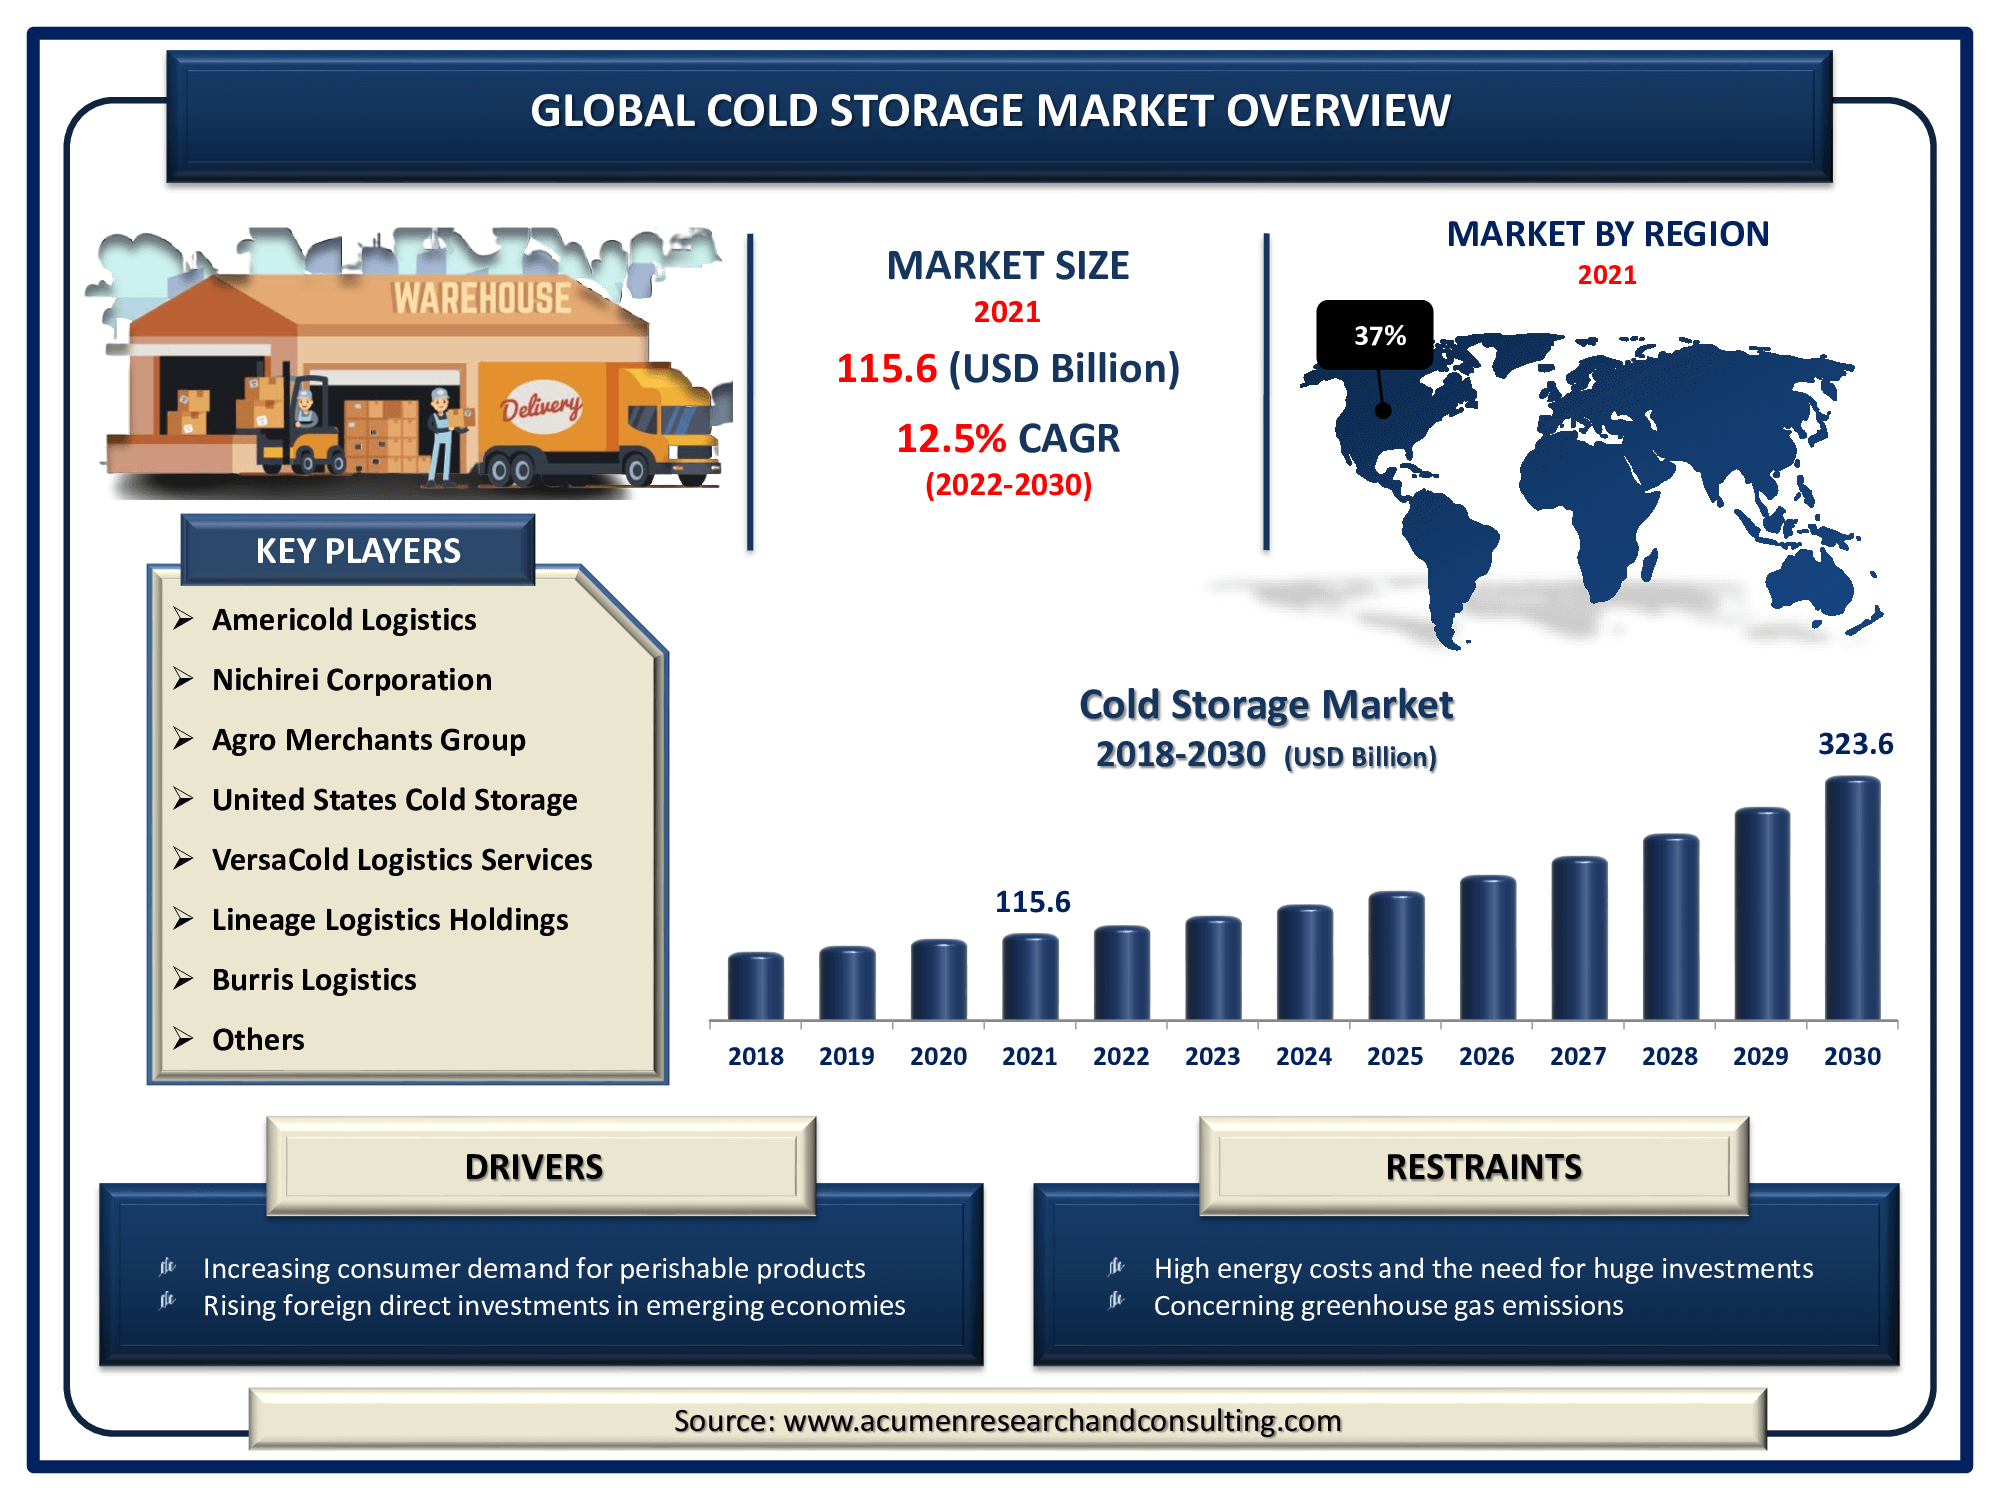 https://www.acumenresearchandconsulting.com/reportimages/Infography_Global-Cold-Storage-Market.png